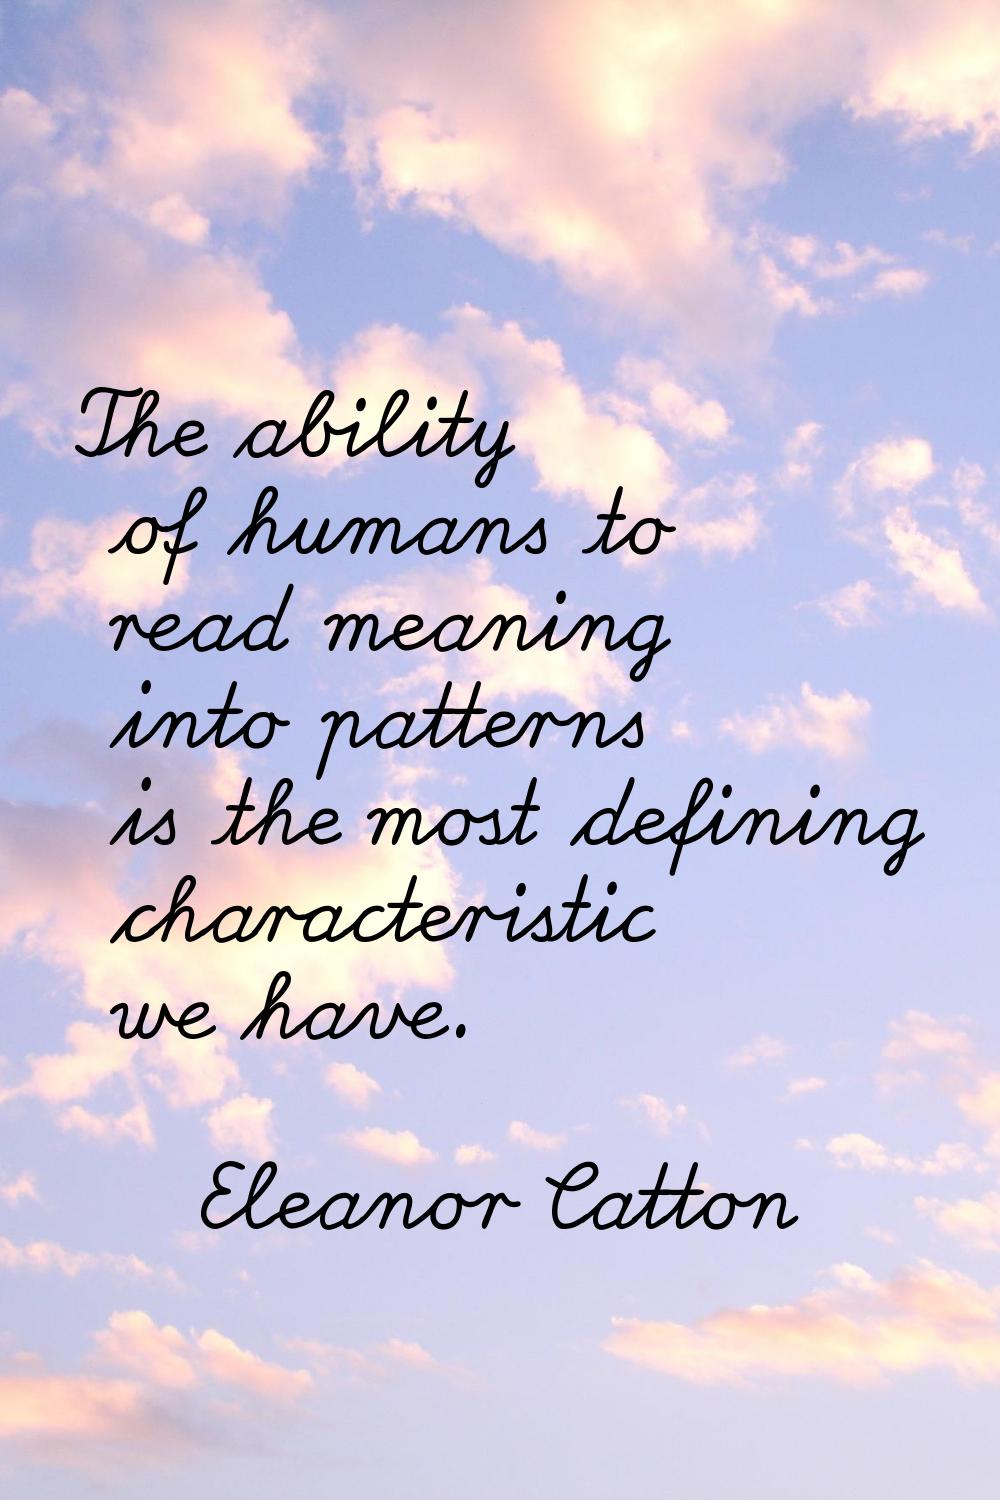 The ability of humans to read meaning into patterns is the most defining characteristic we have.